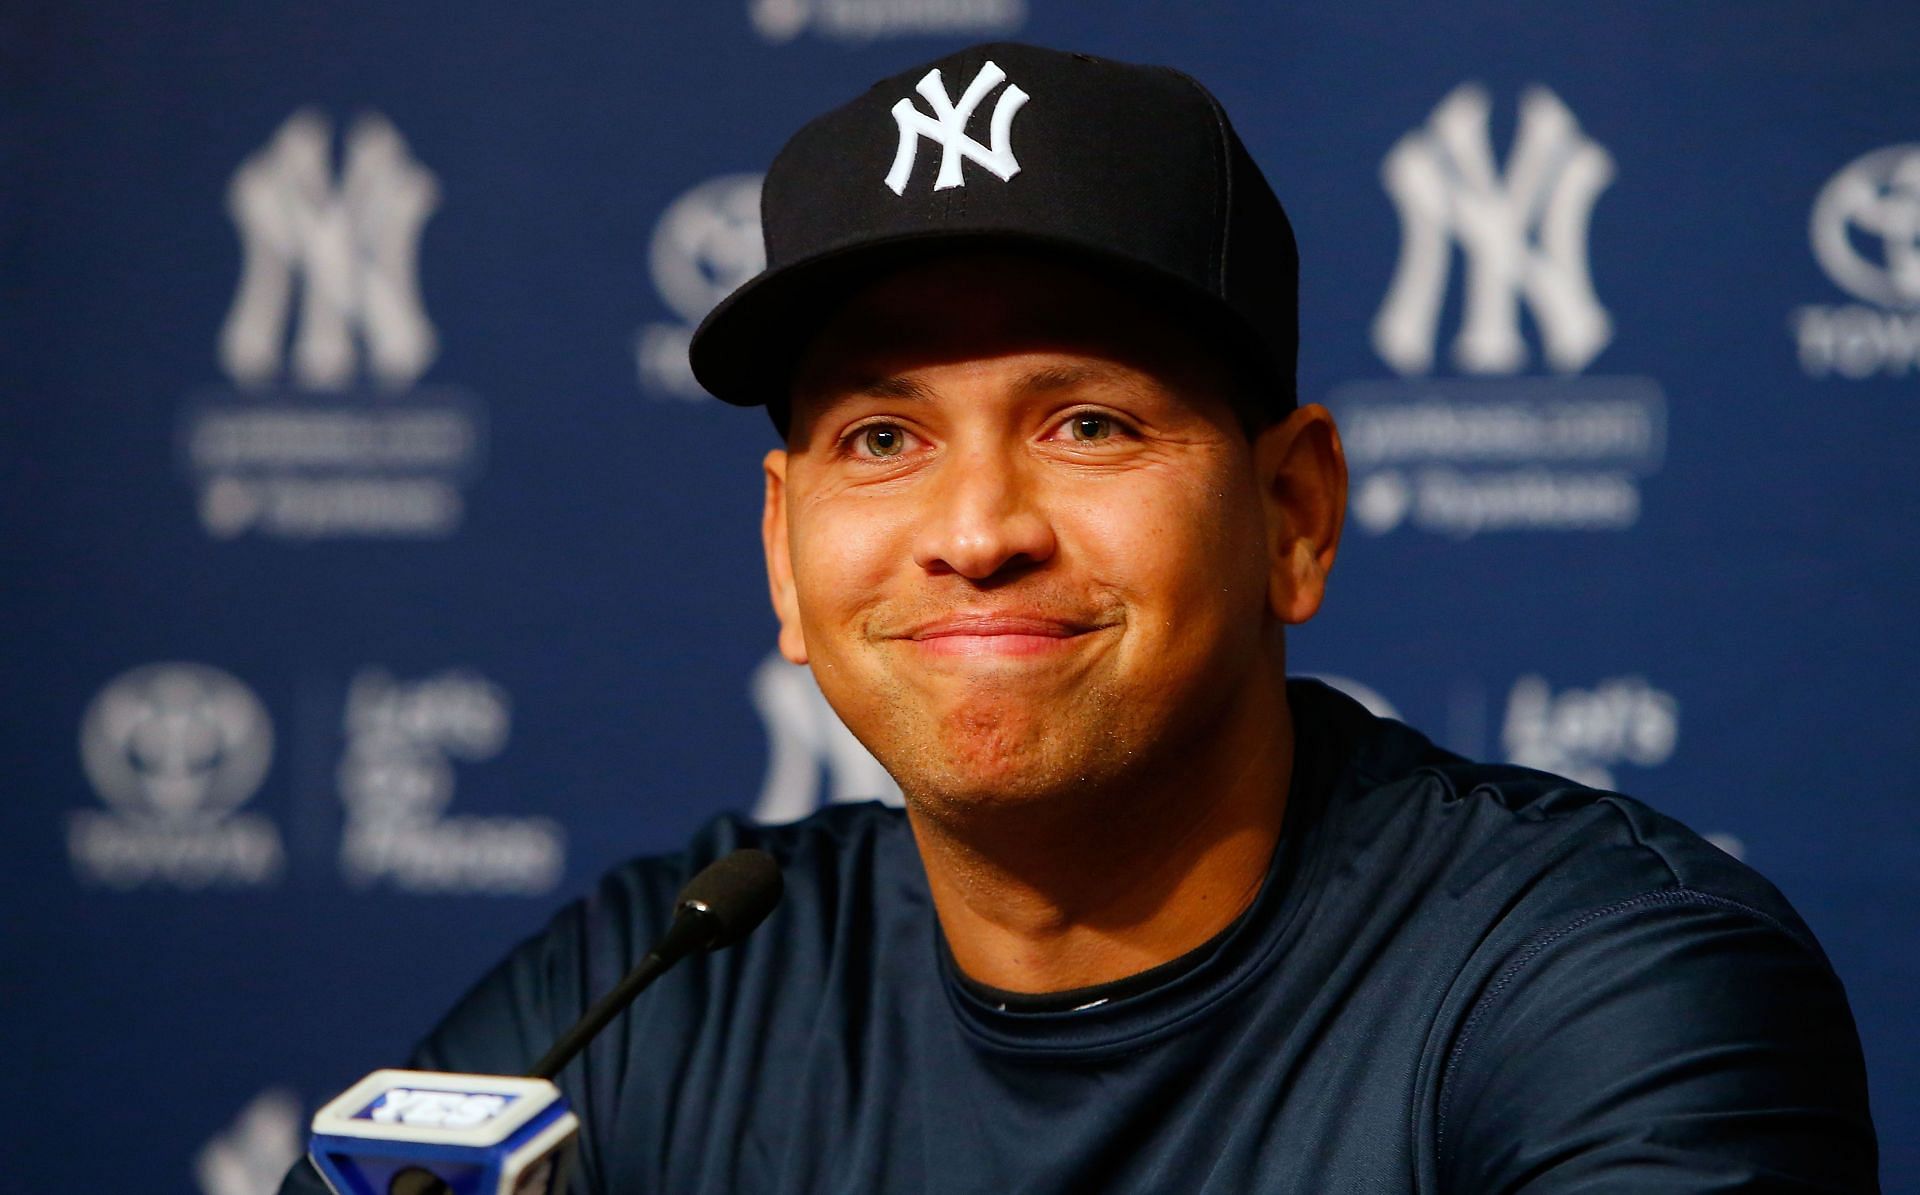 Alex Rodriguez - &quot;This is one of the most humbling experiences of my life&quot;